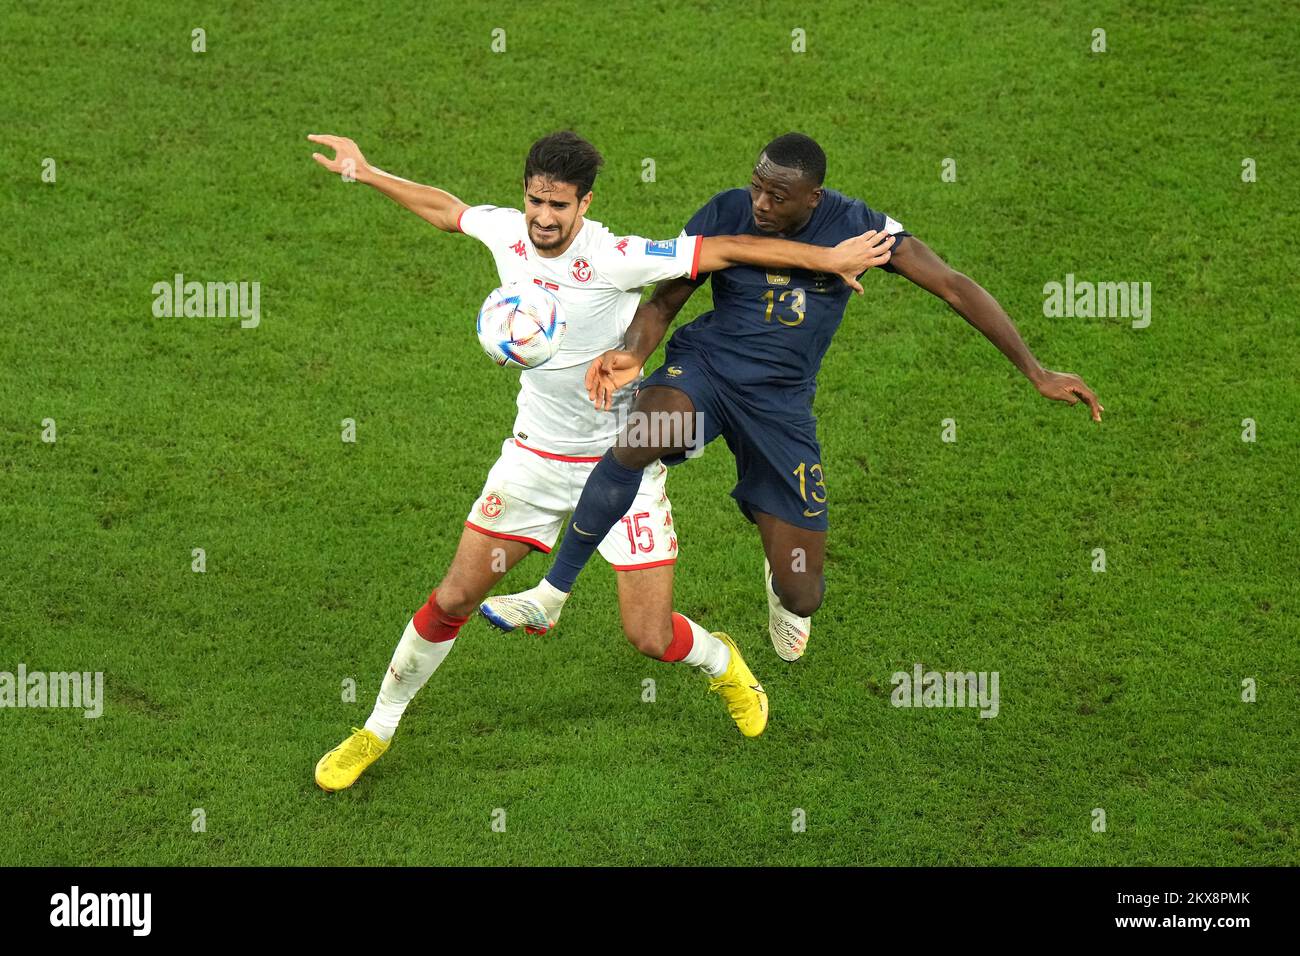 Tunisia's Mohamed Ali Ben Romdhane (left) and France's Youssouf Fofana battle for the ball during the FIFA World Cup Group D match at the Education City Stadium in Al Rayyan, Qatar. Picture date: Wednesday November 30, 2022. Stock Photo